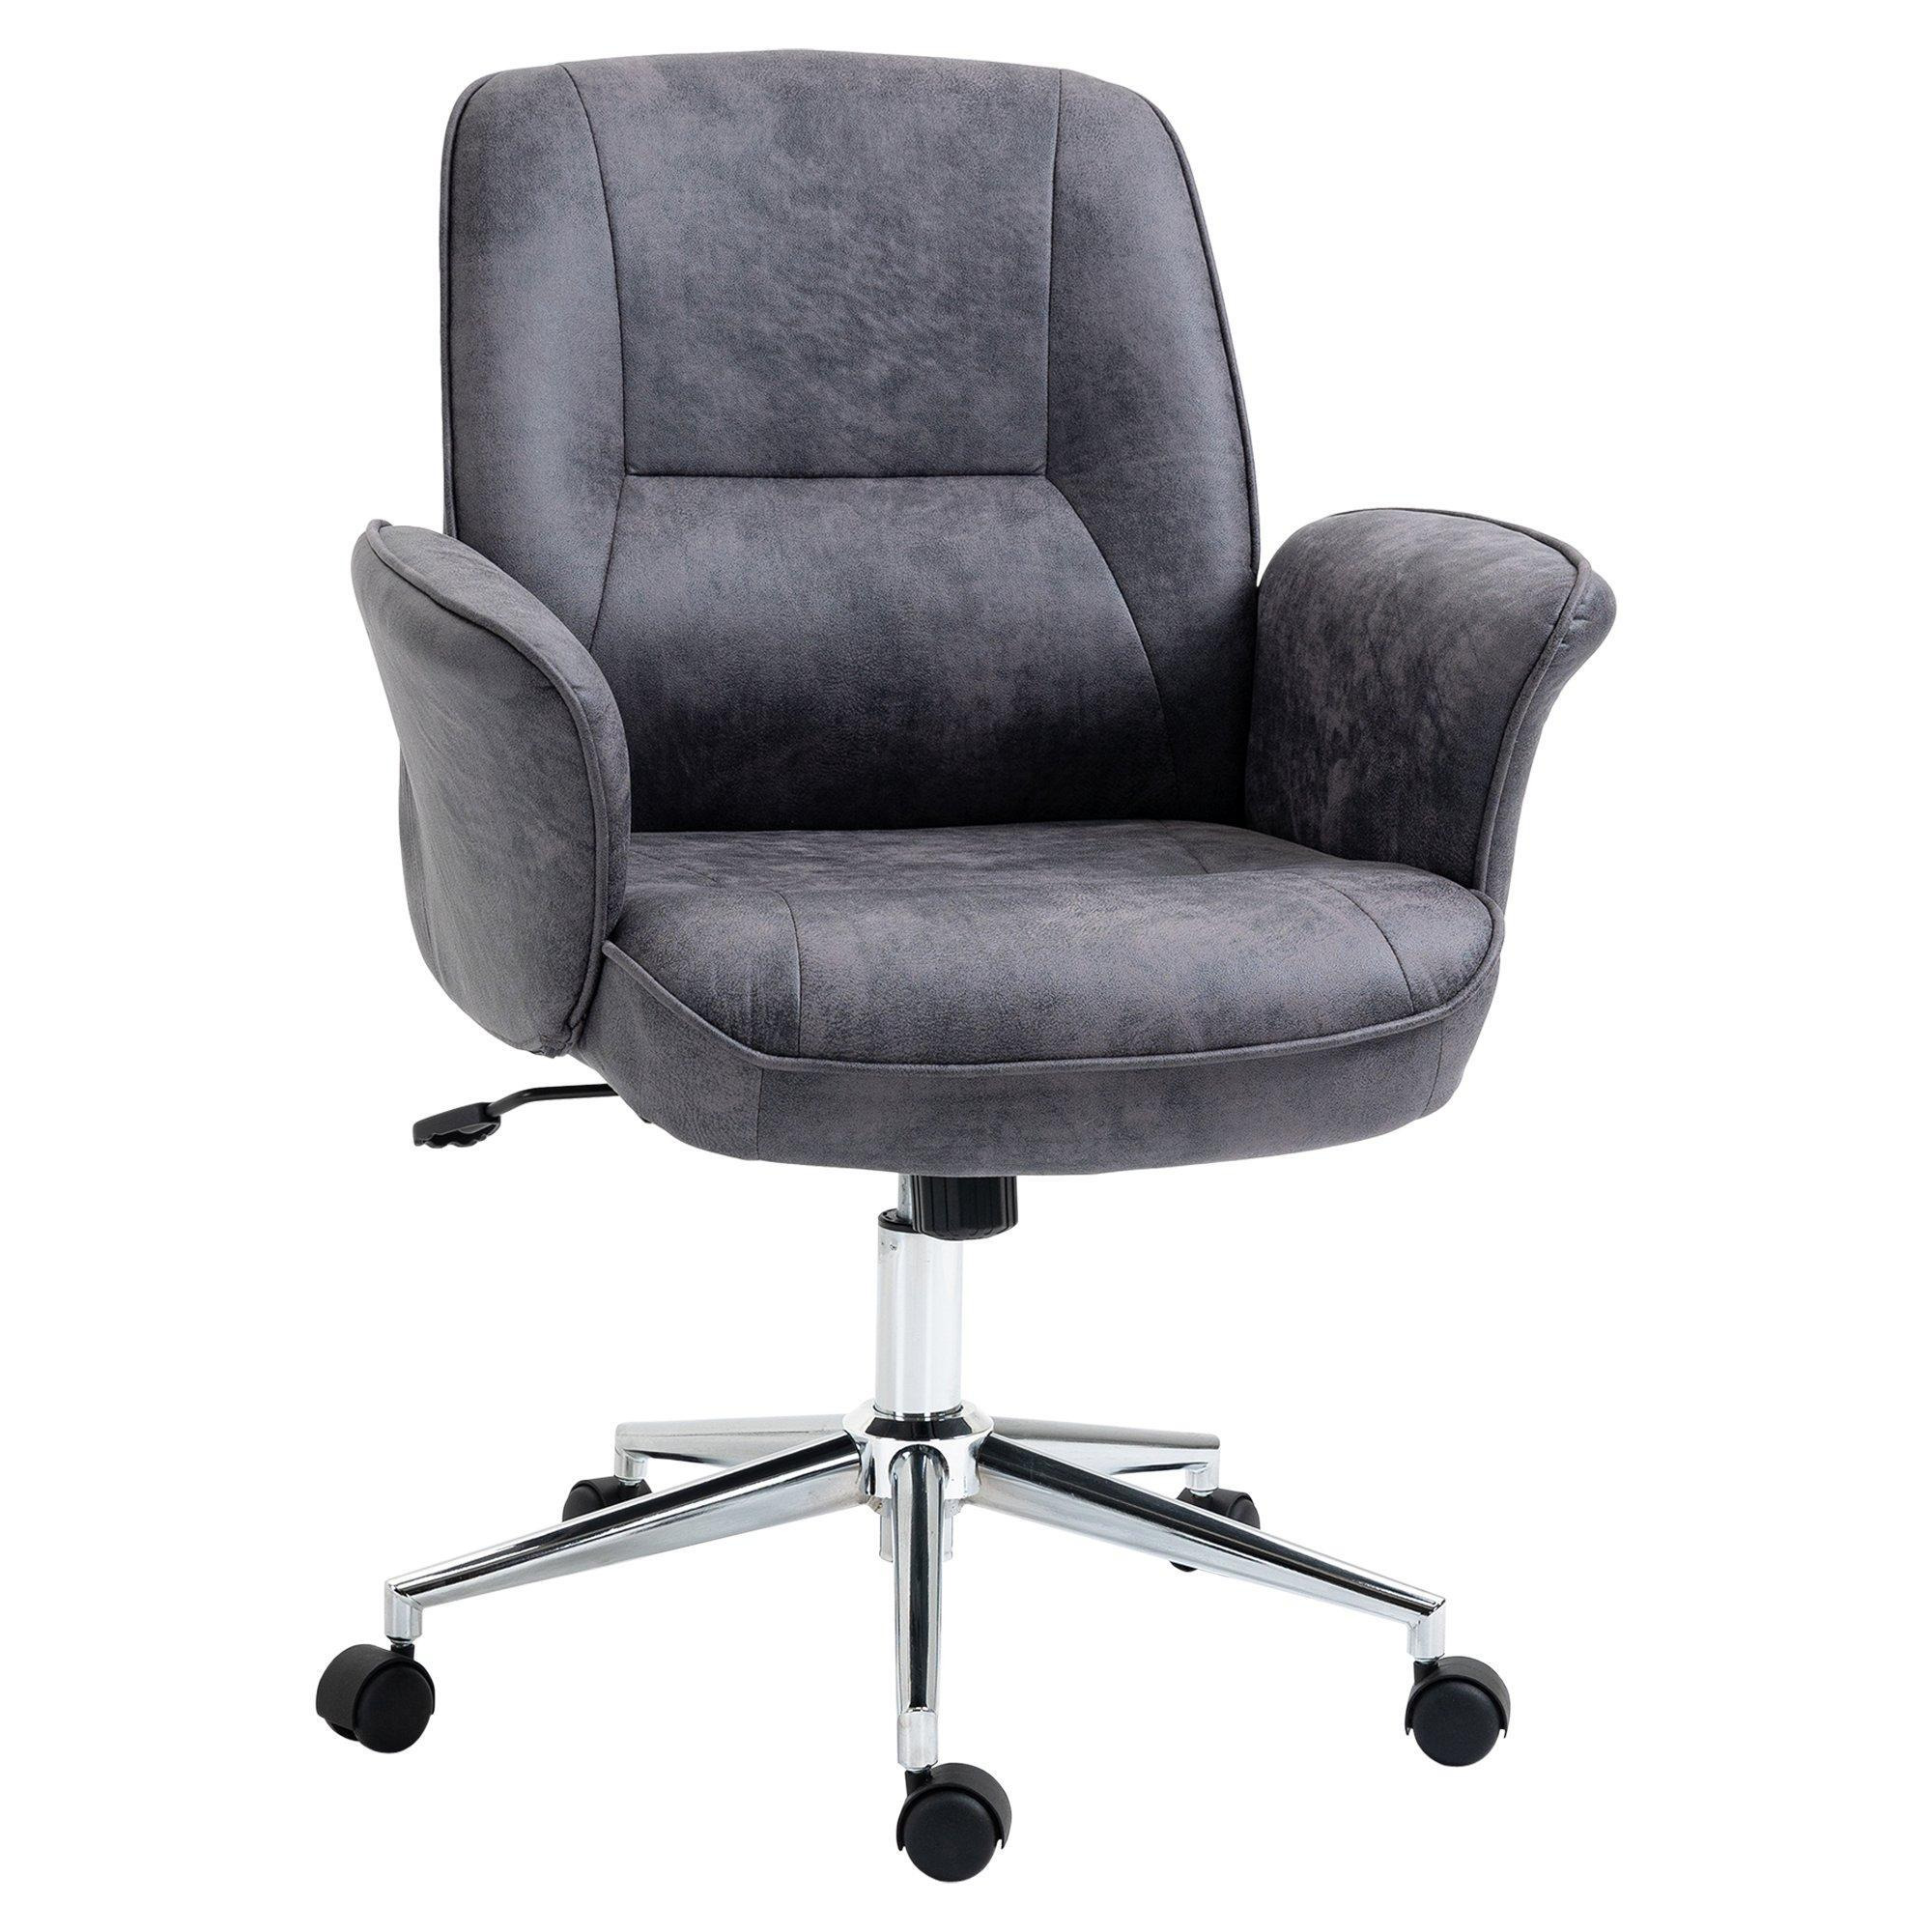 Swivel Computer Office Chair Mid Back Desk Chair Home Study Bedroom - image 1